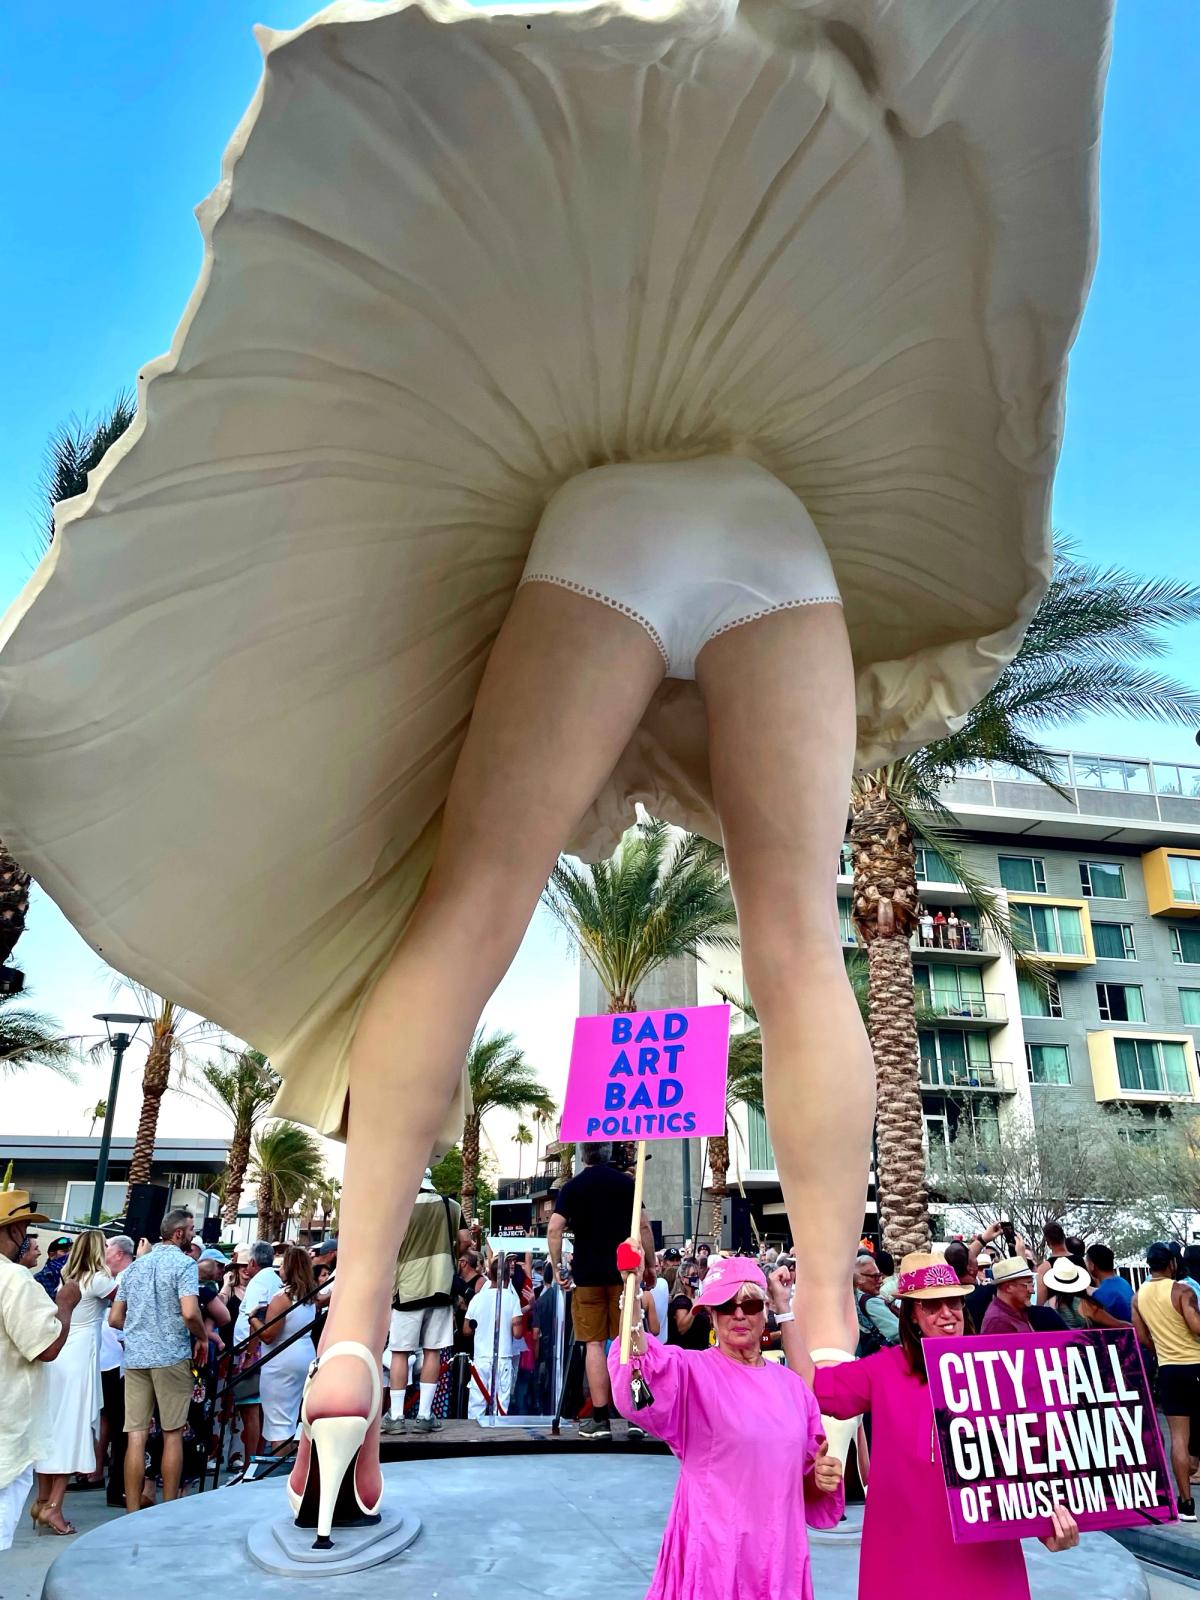 Outrage Over Sexy Giant Marilyn Monroe Palm Springs Statue: 'Sexist,  Exploitive' - No Peace 'Even In Death' 